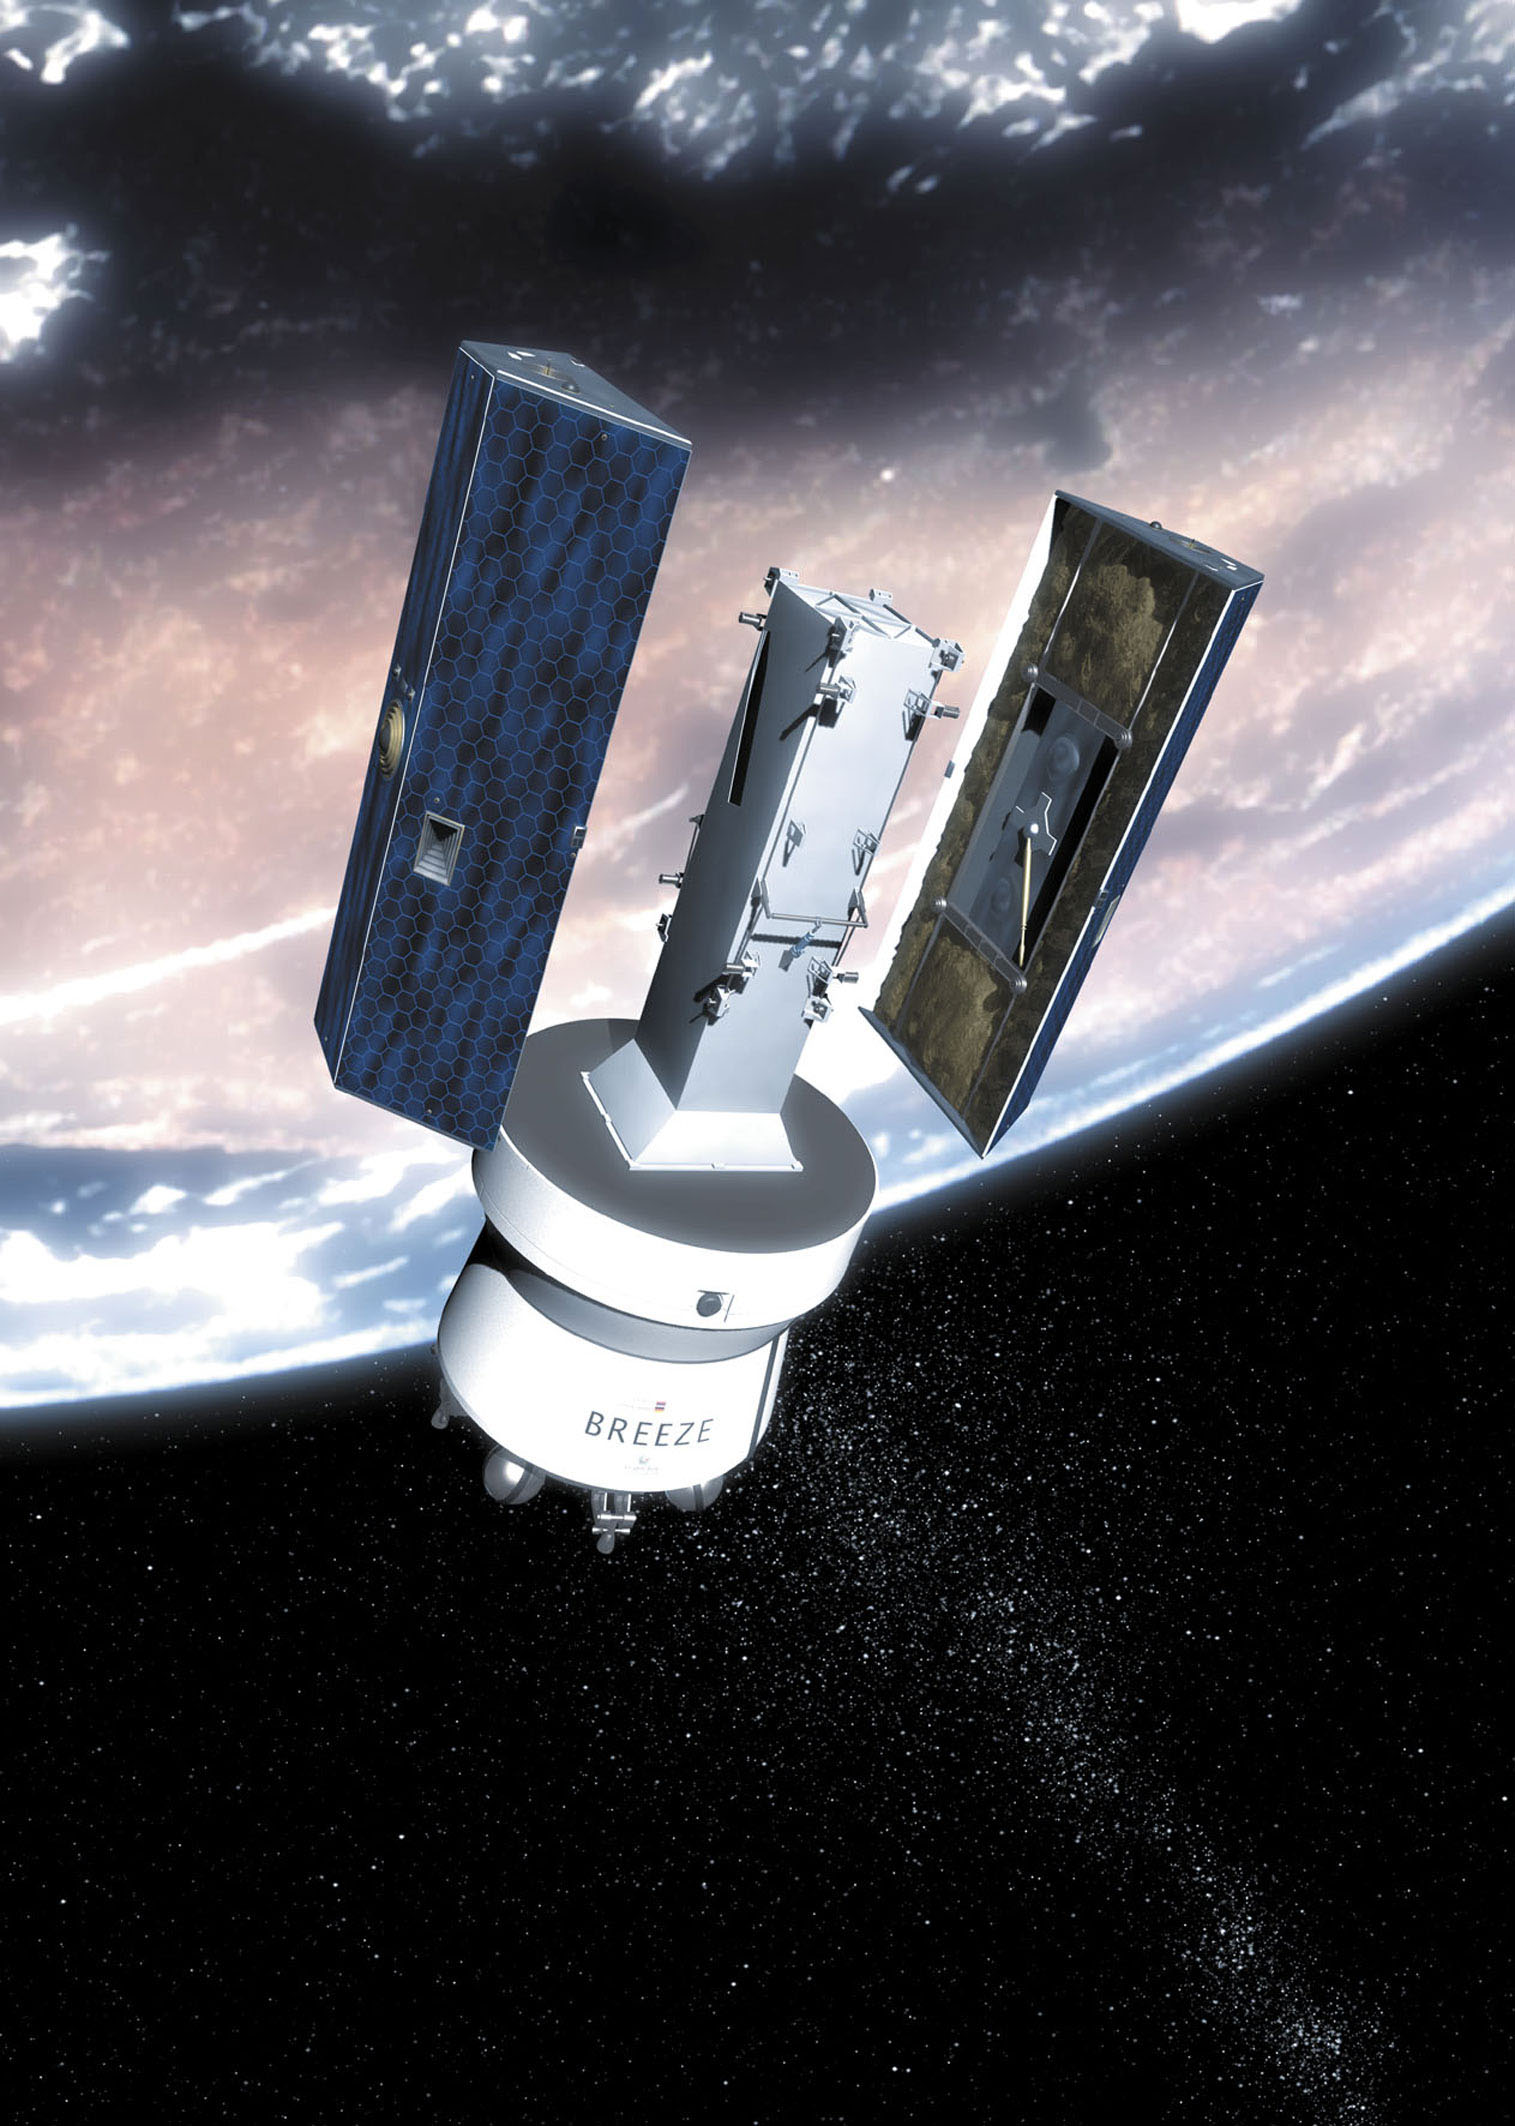 Twin GRACE spacecraft being deployed from Breeze